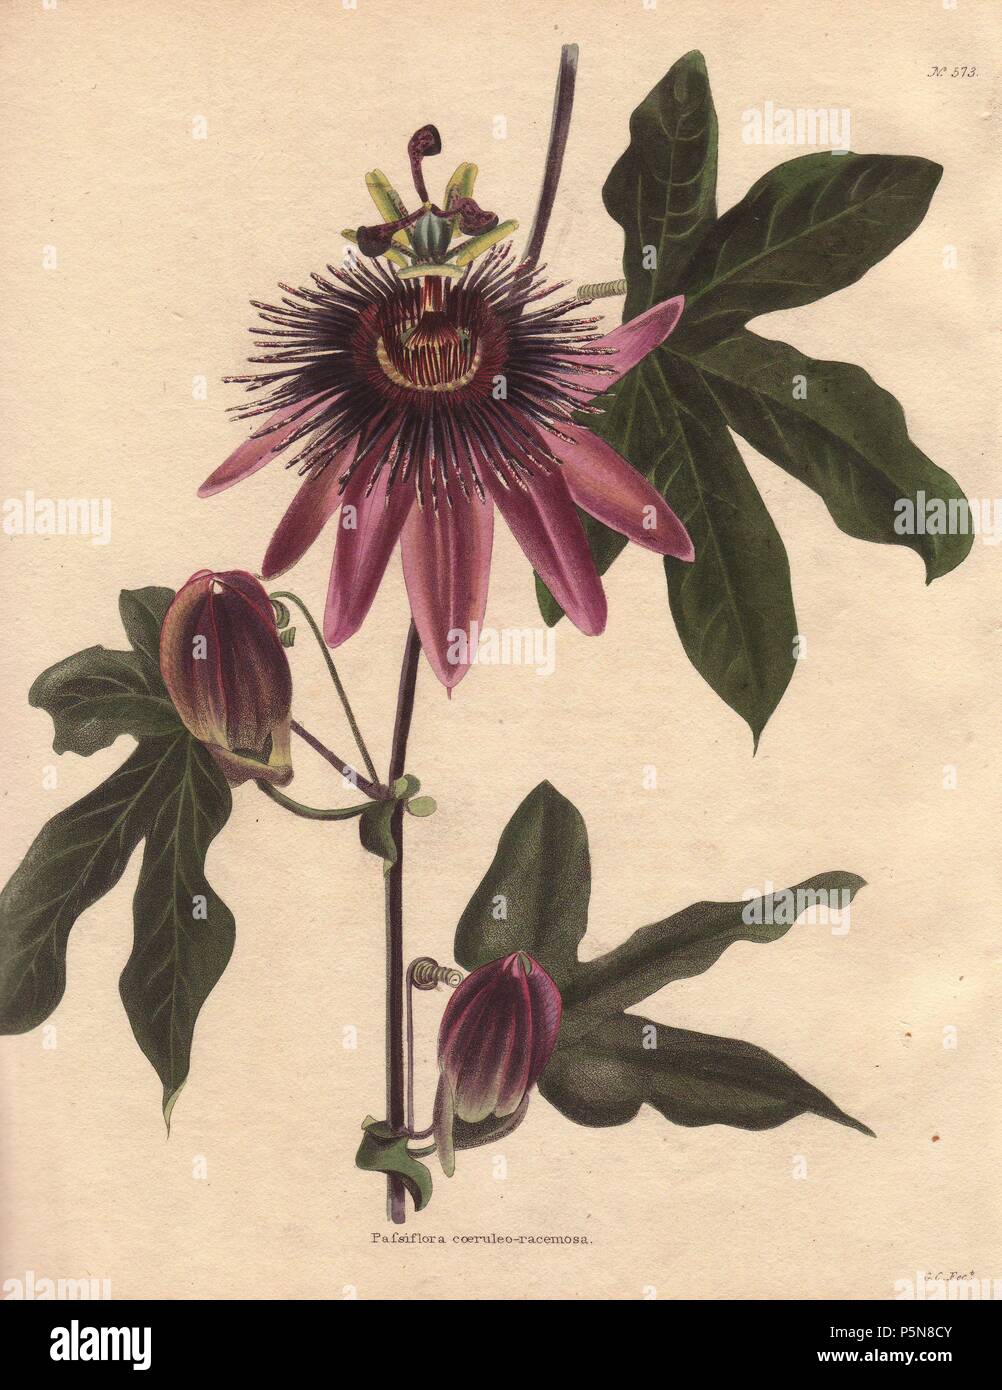 Passiflora caeruleo racemosa. Passionflower hybrid with deep purple flowers.. Conrad Loddiges and Sons published an illustrated catalogue of the nursery's plants entitled the Botanical Cabinet. The monthly magazine featured 10 hand-coloured illustrations and ran from 1817 to 1833 to total 2,000 plates. The publication introduced many exquisite camellias from China, exotic orchids and lilies from the New World, and about 100 varieties of heaths from South Africa, which were currently in vogue. (The Victorian era saw a series of manias for flowers - from roses and camellias to heaths, ferns and  Stock Photo